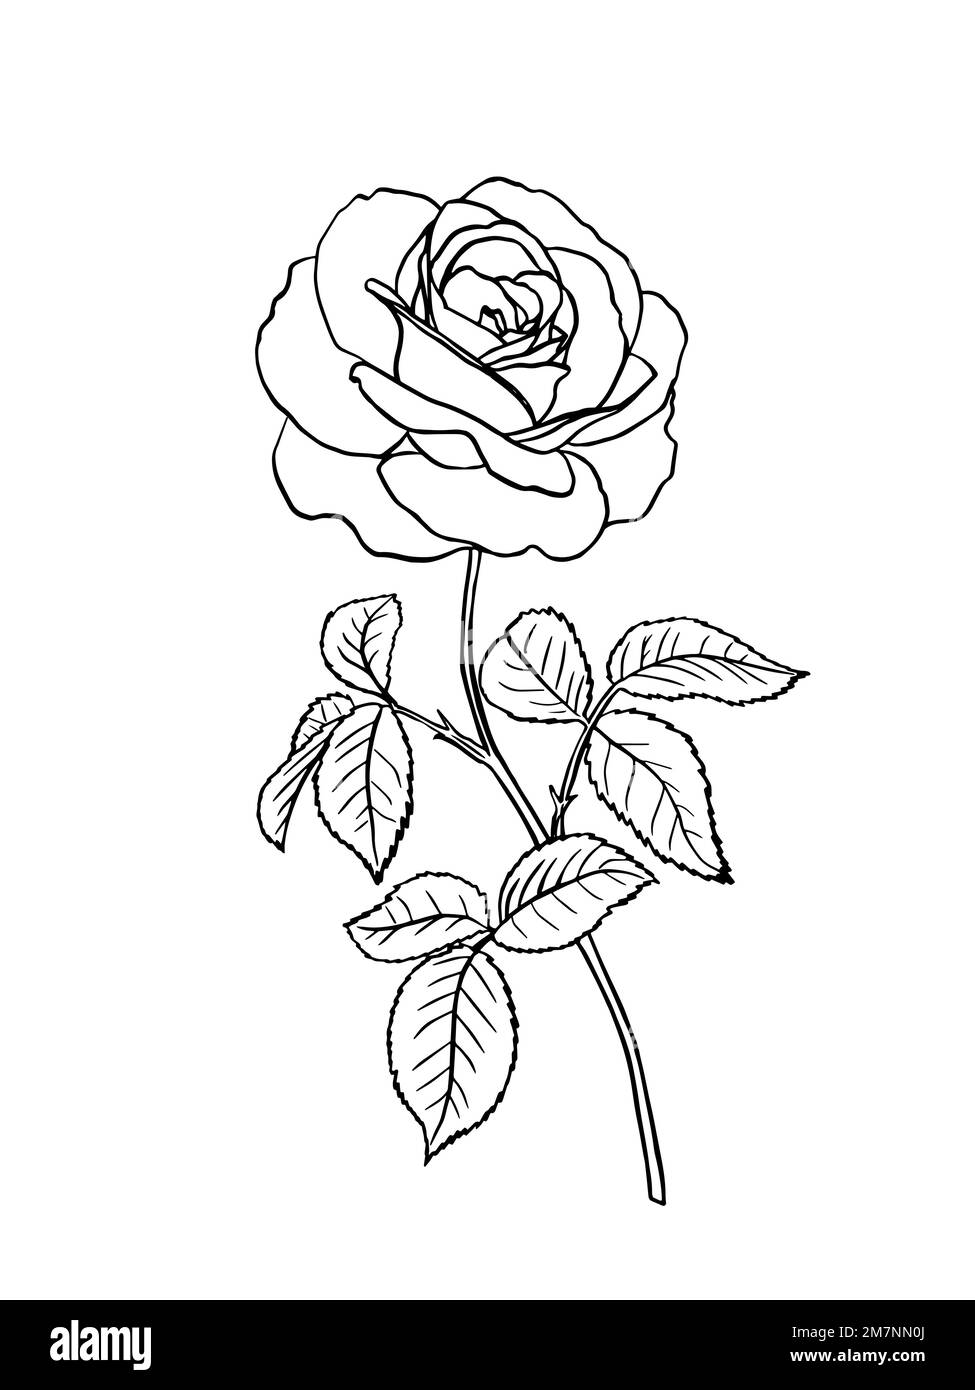 Black and white rose flower with leaves and stem. Realistic vector ...